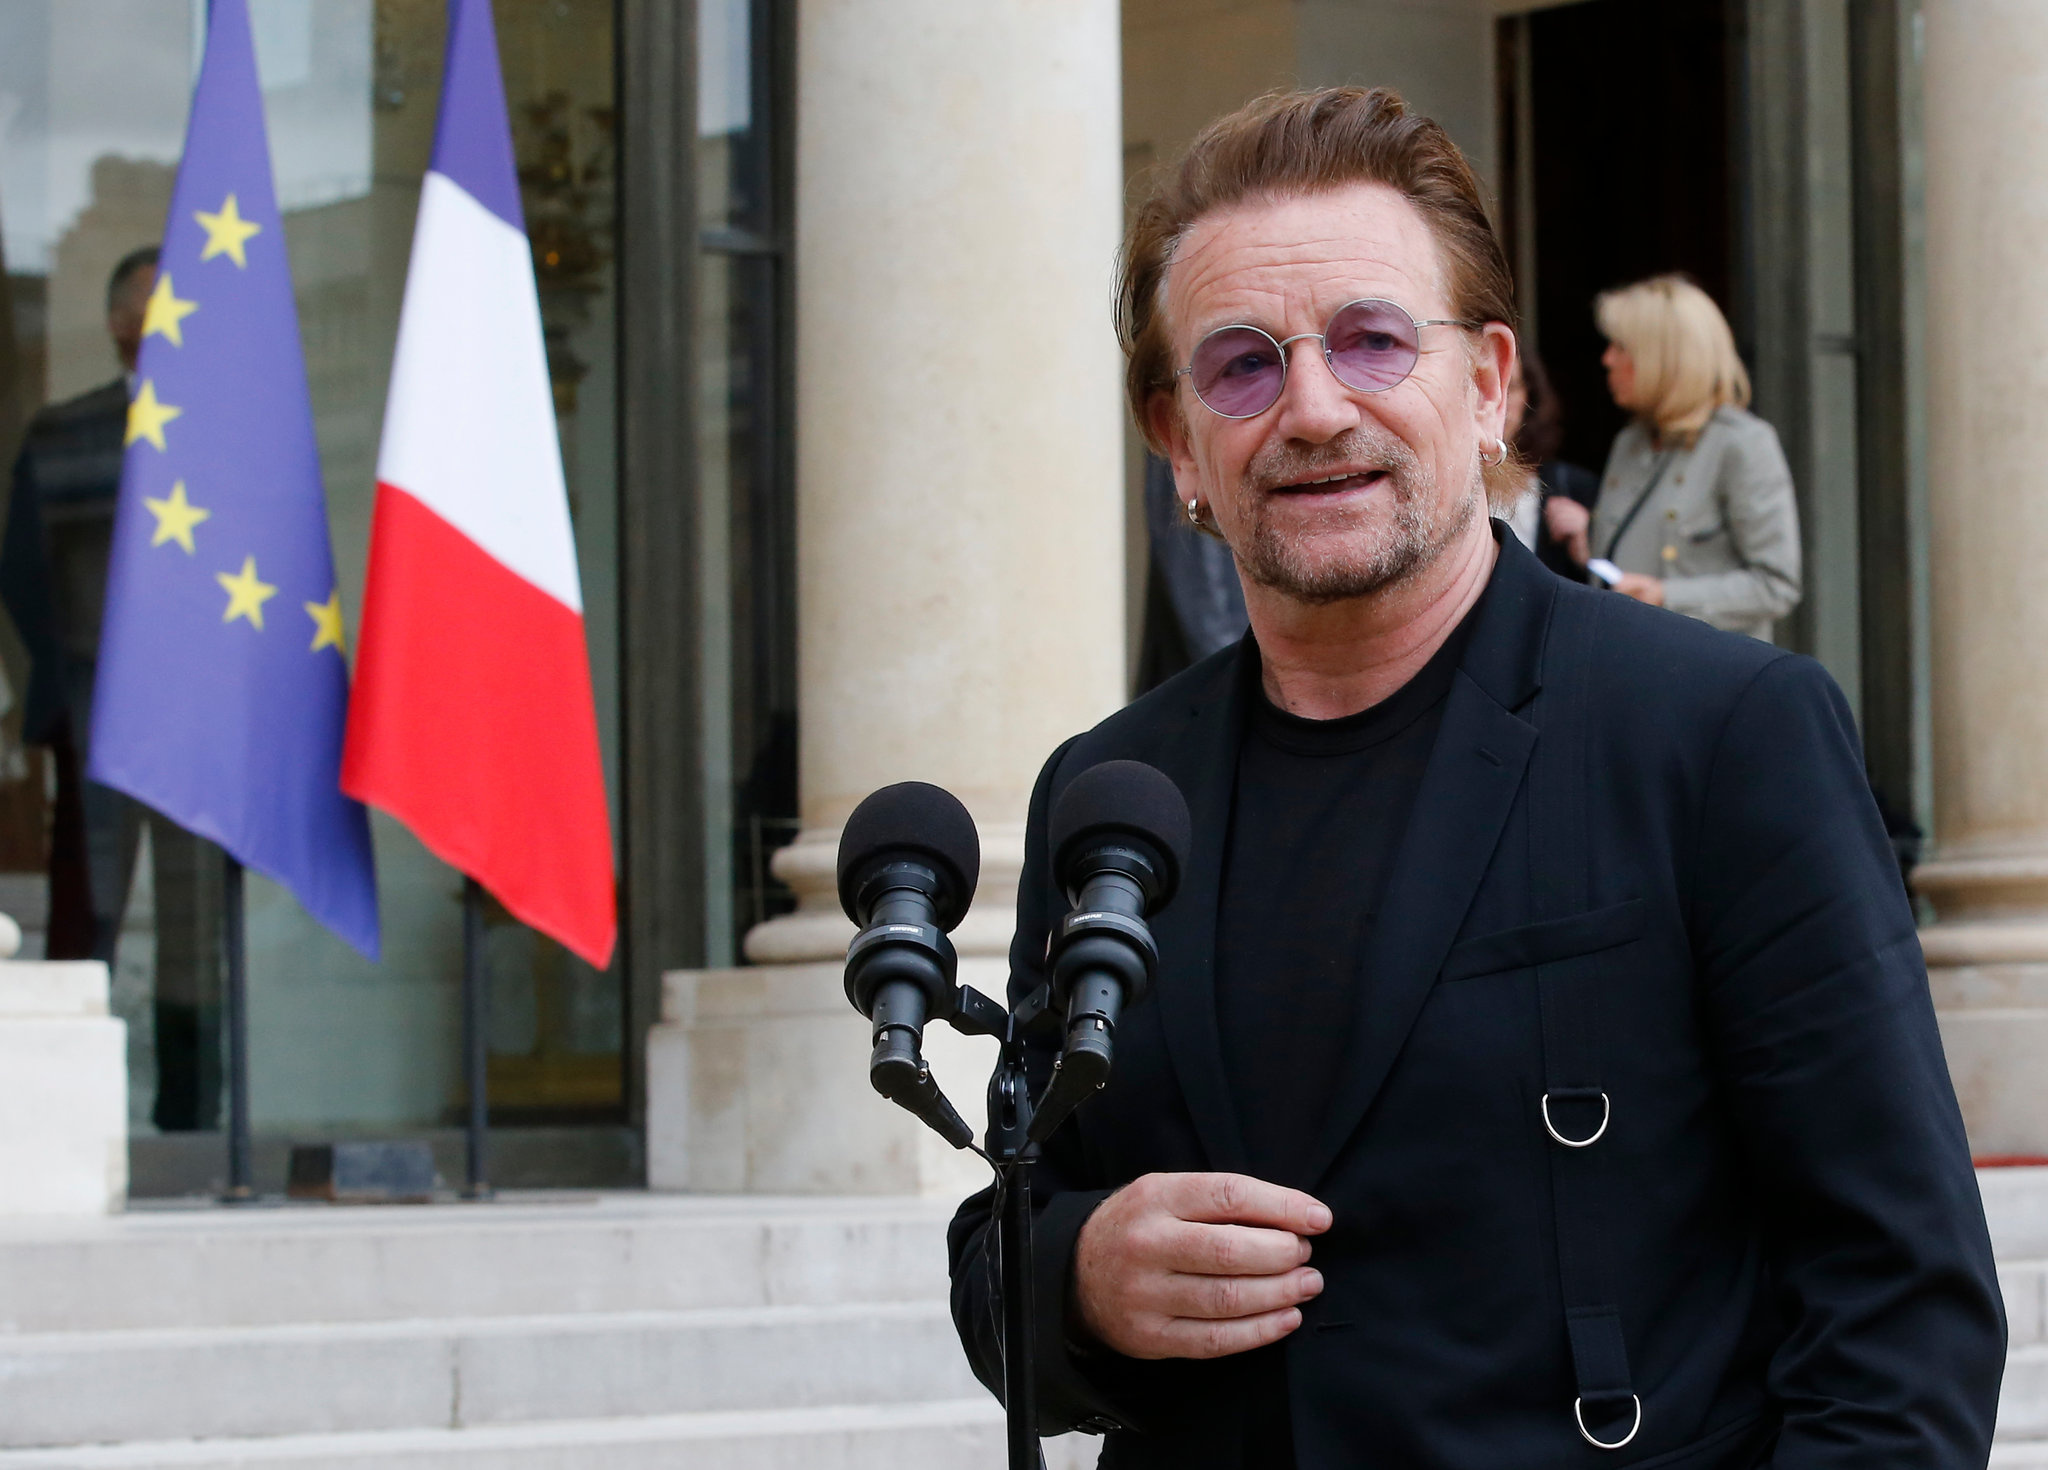 Bono Apologizes as Accusations of Bullying and Abuse Hit Charity He Co-Founded - The New York Times 2050x1470